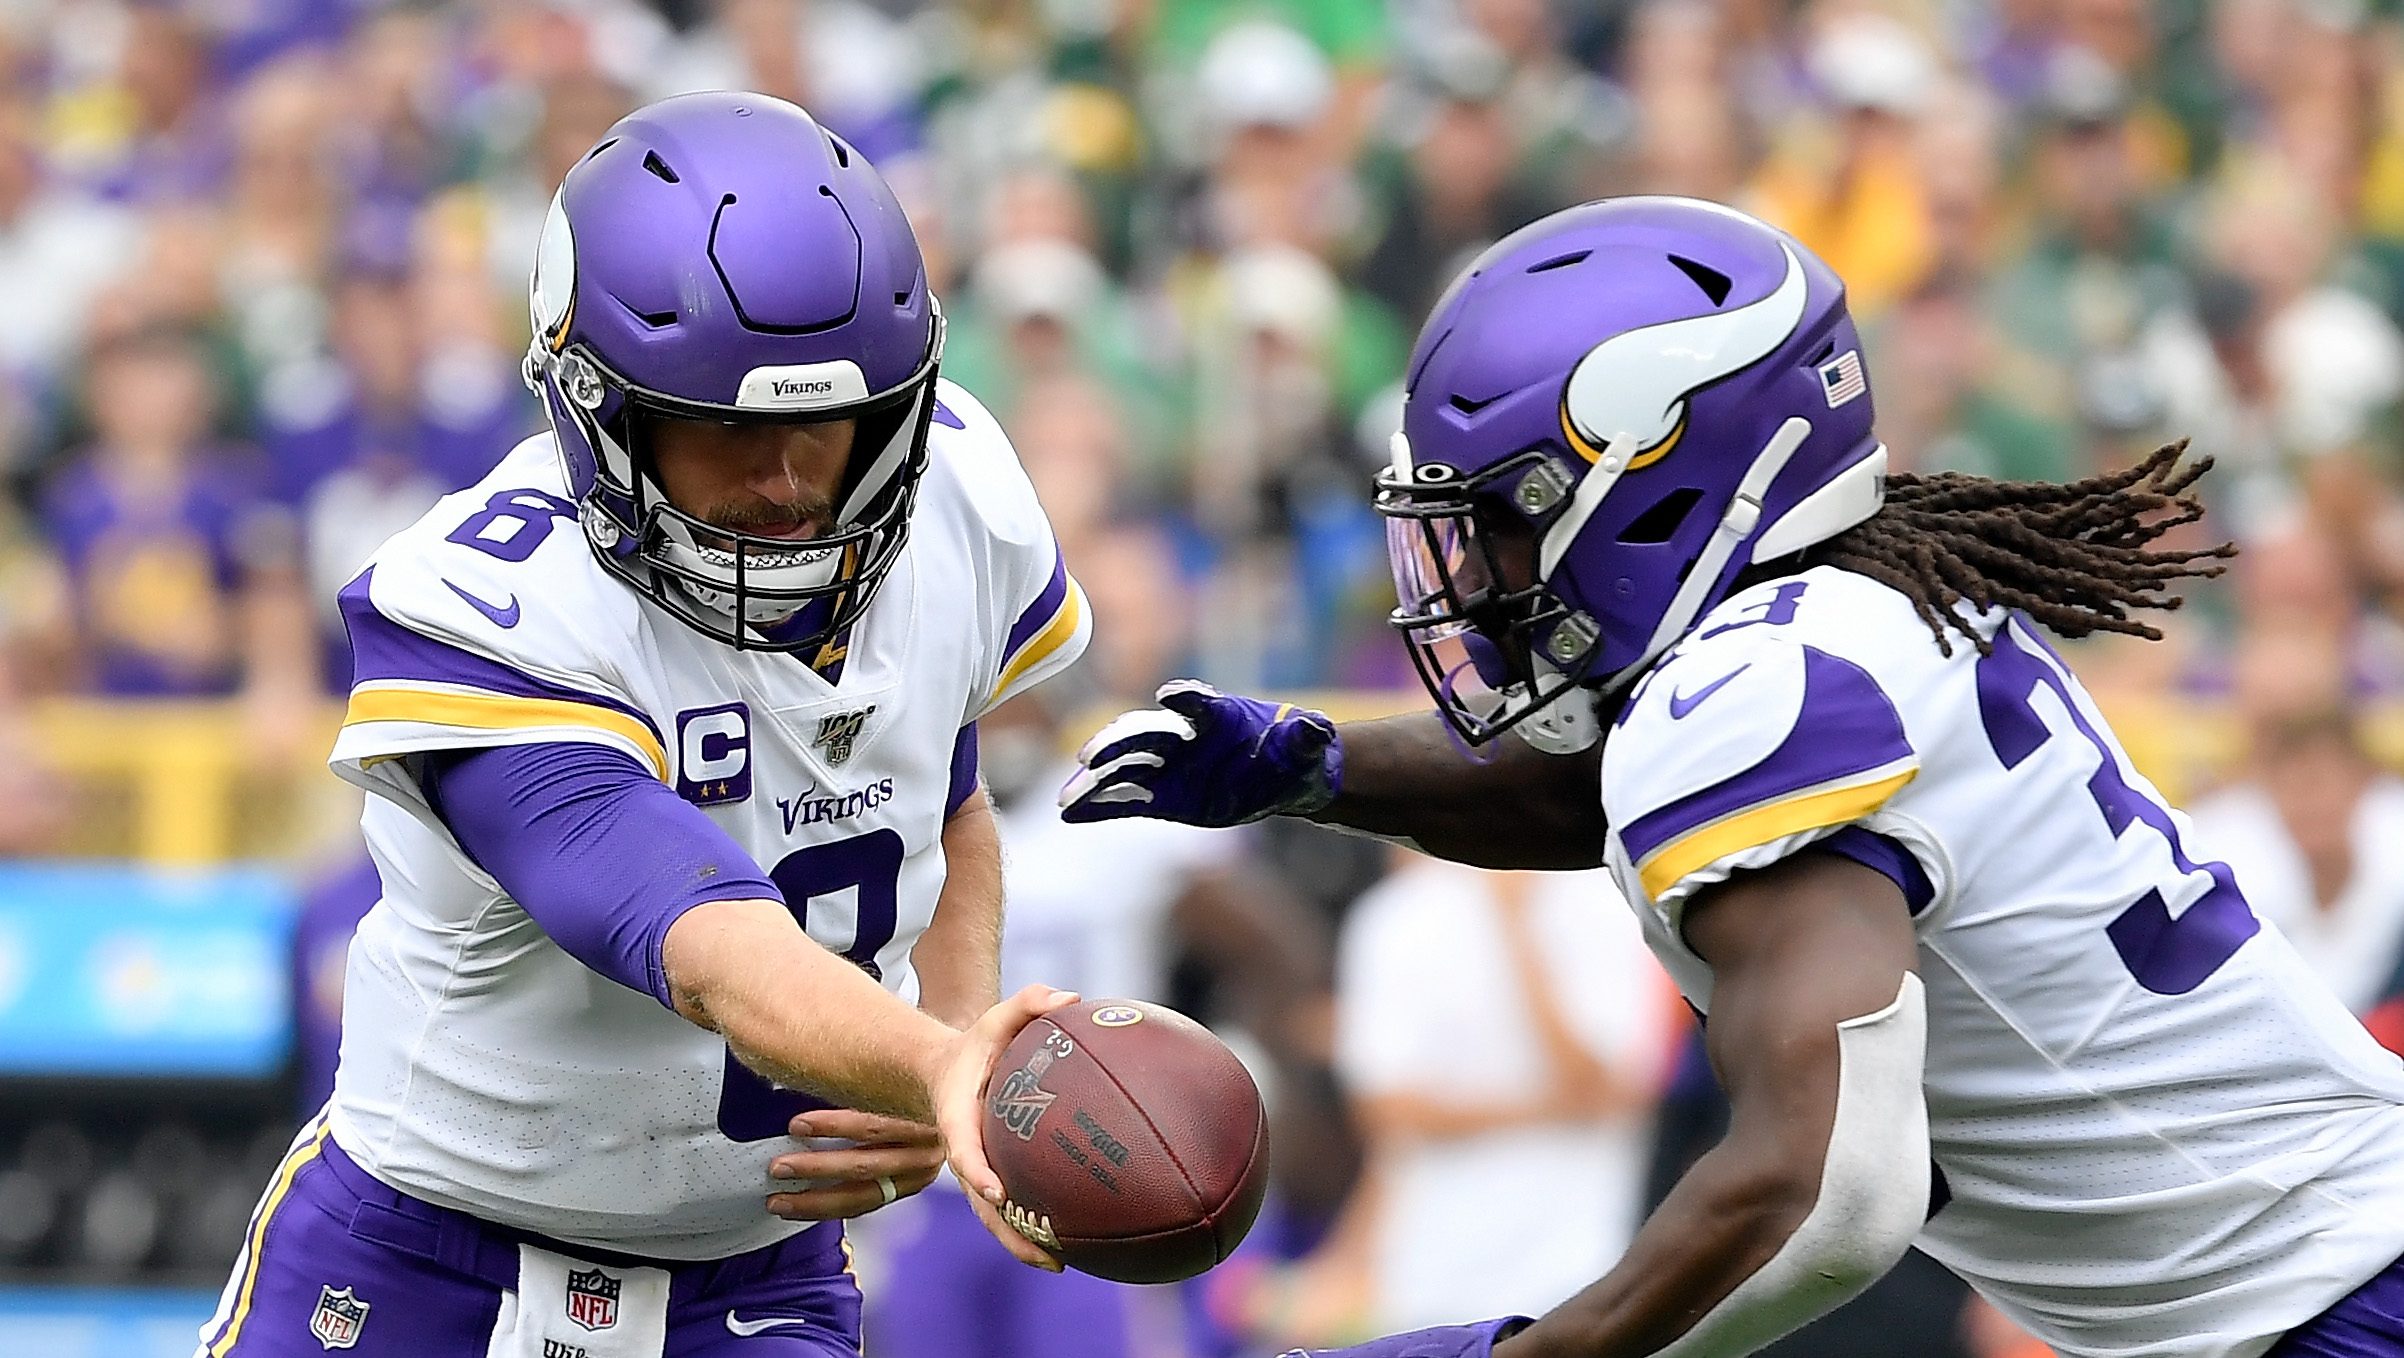 The Vikings' MustMake Offseason Move Revealed to NFL